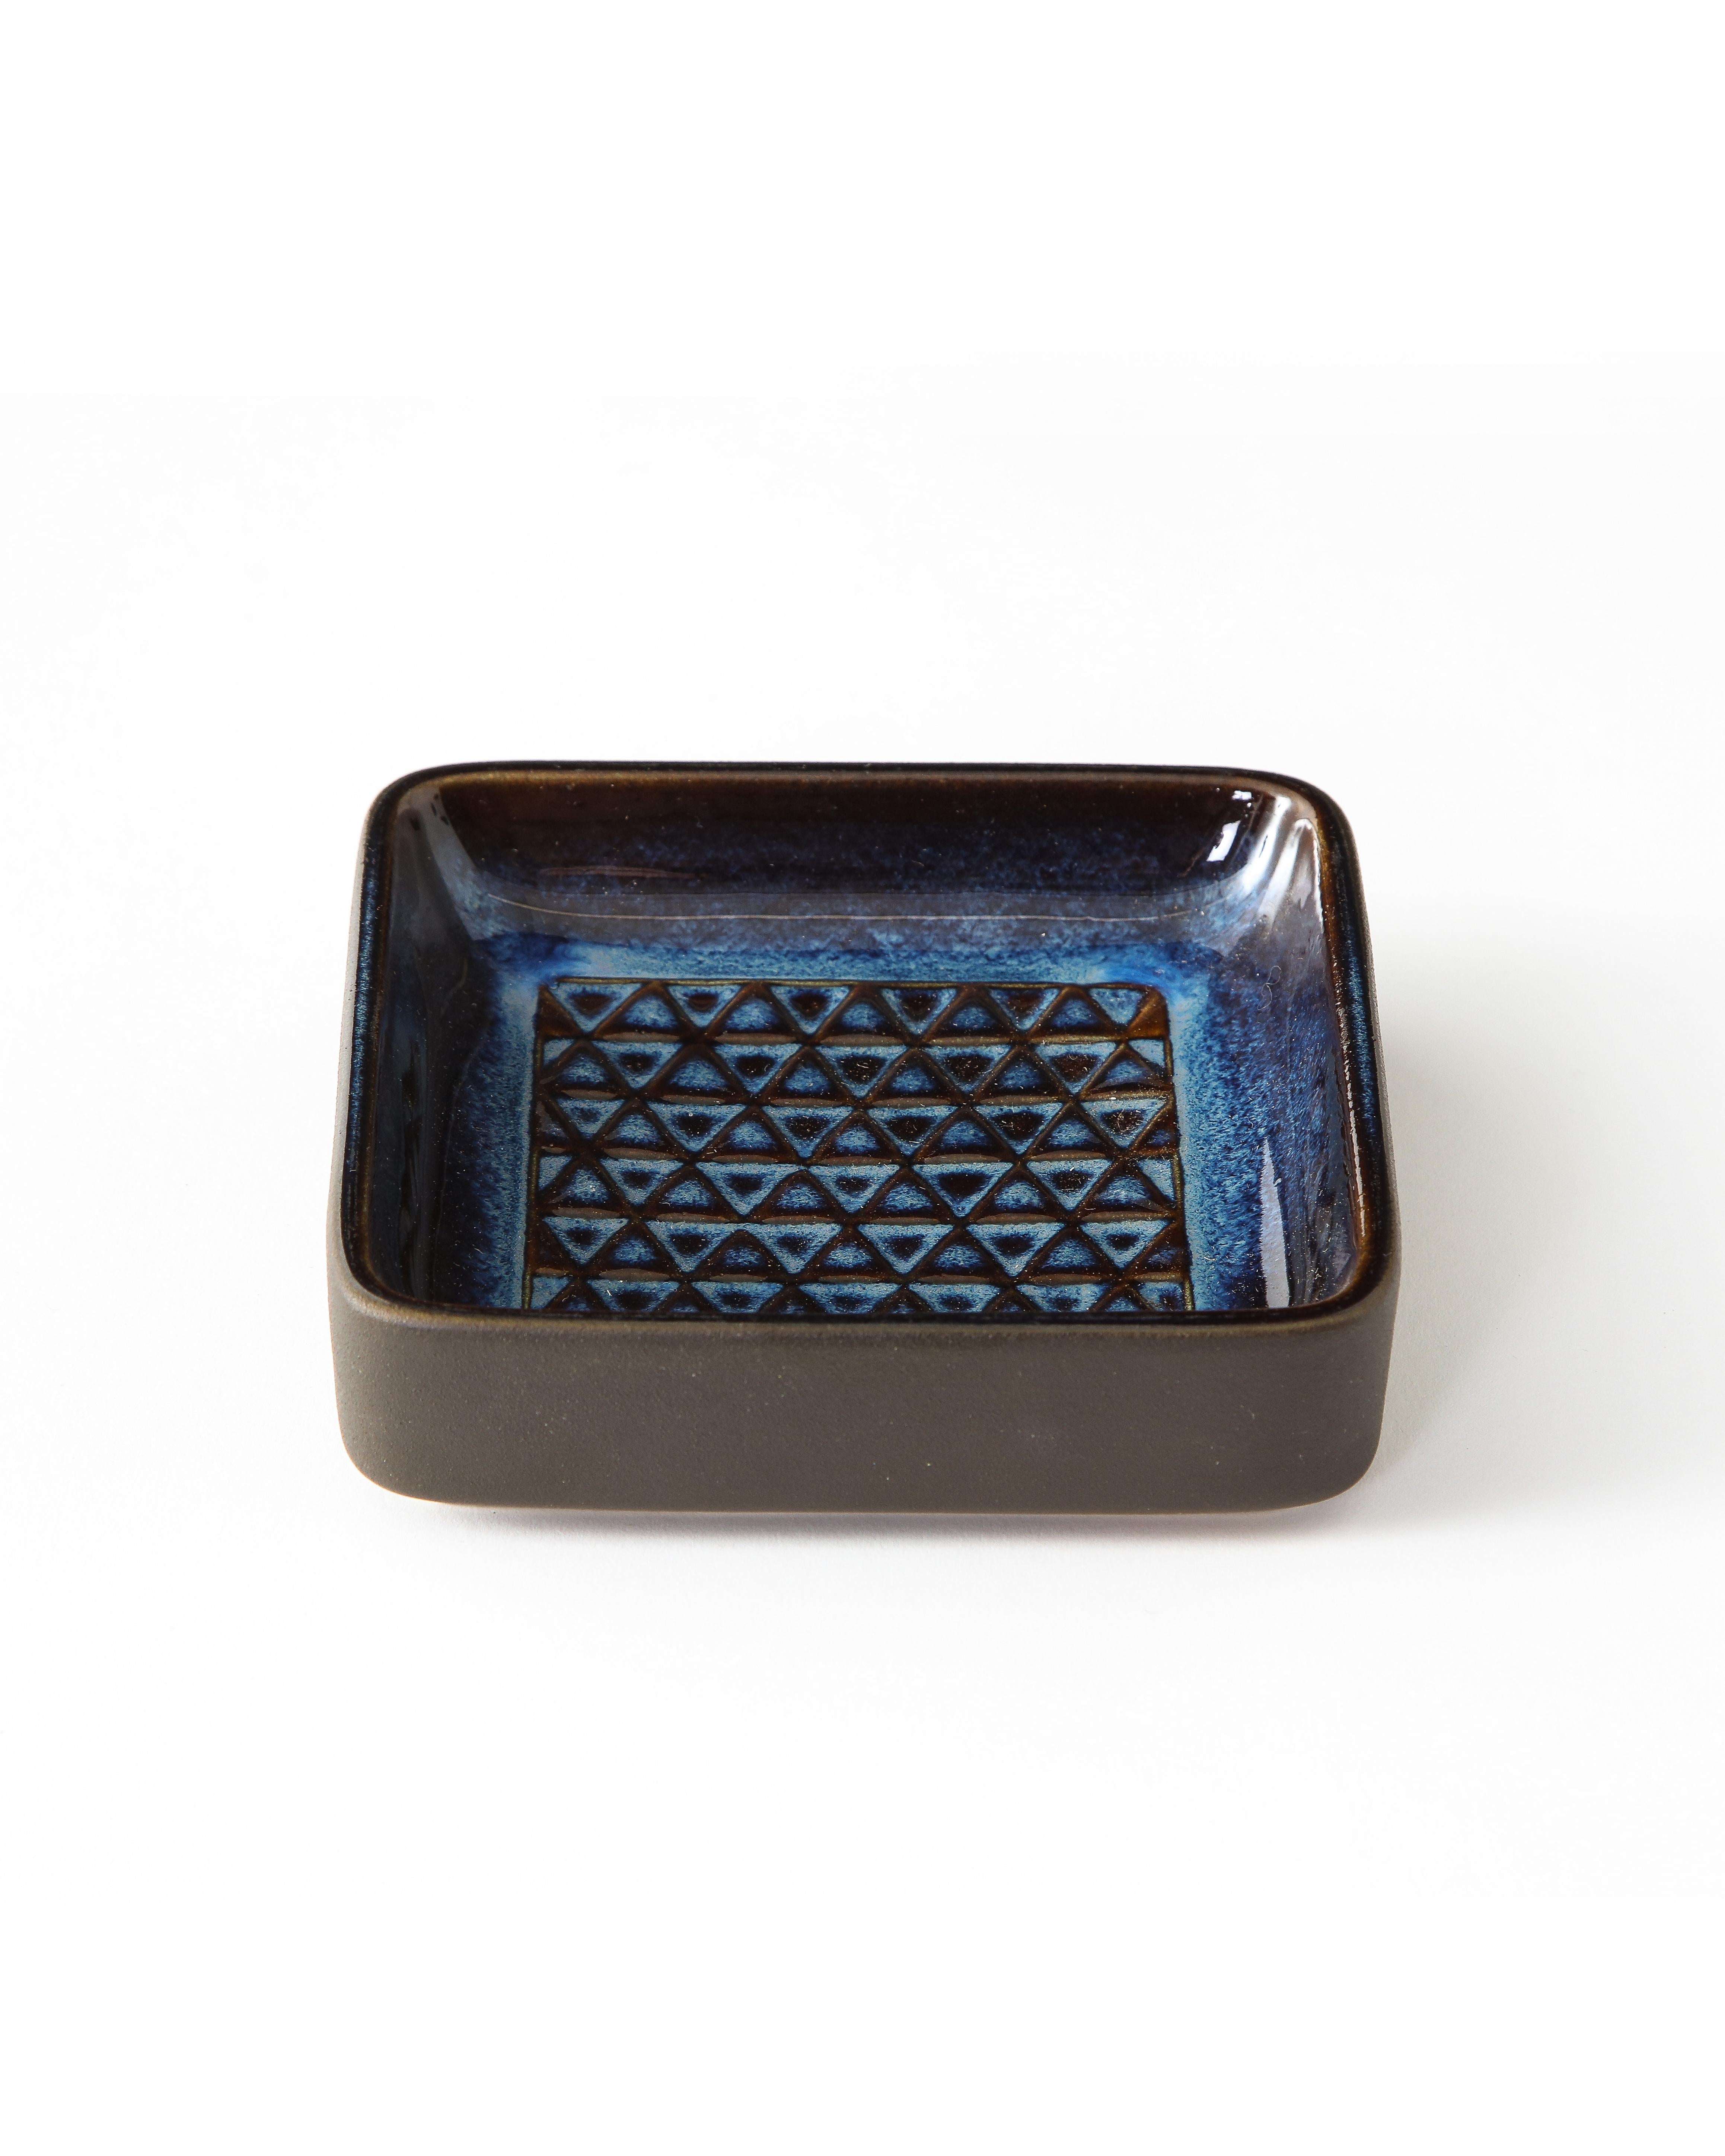 Lovely small square catch-all or table top object in handsome deep blue glaze. Pressed triangular pattern on interior. Highlights and lowlights of glaze are characteristic of this style of pottery. Marked and numbered Søholm, Denmark.